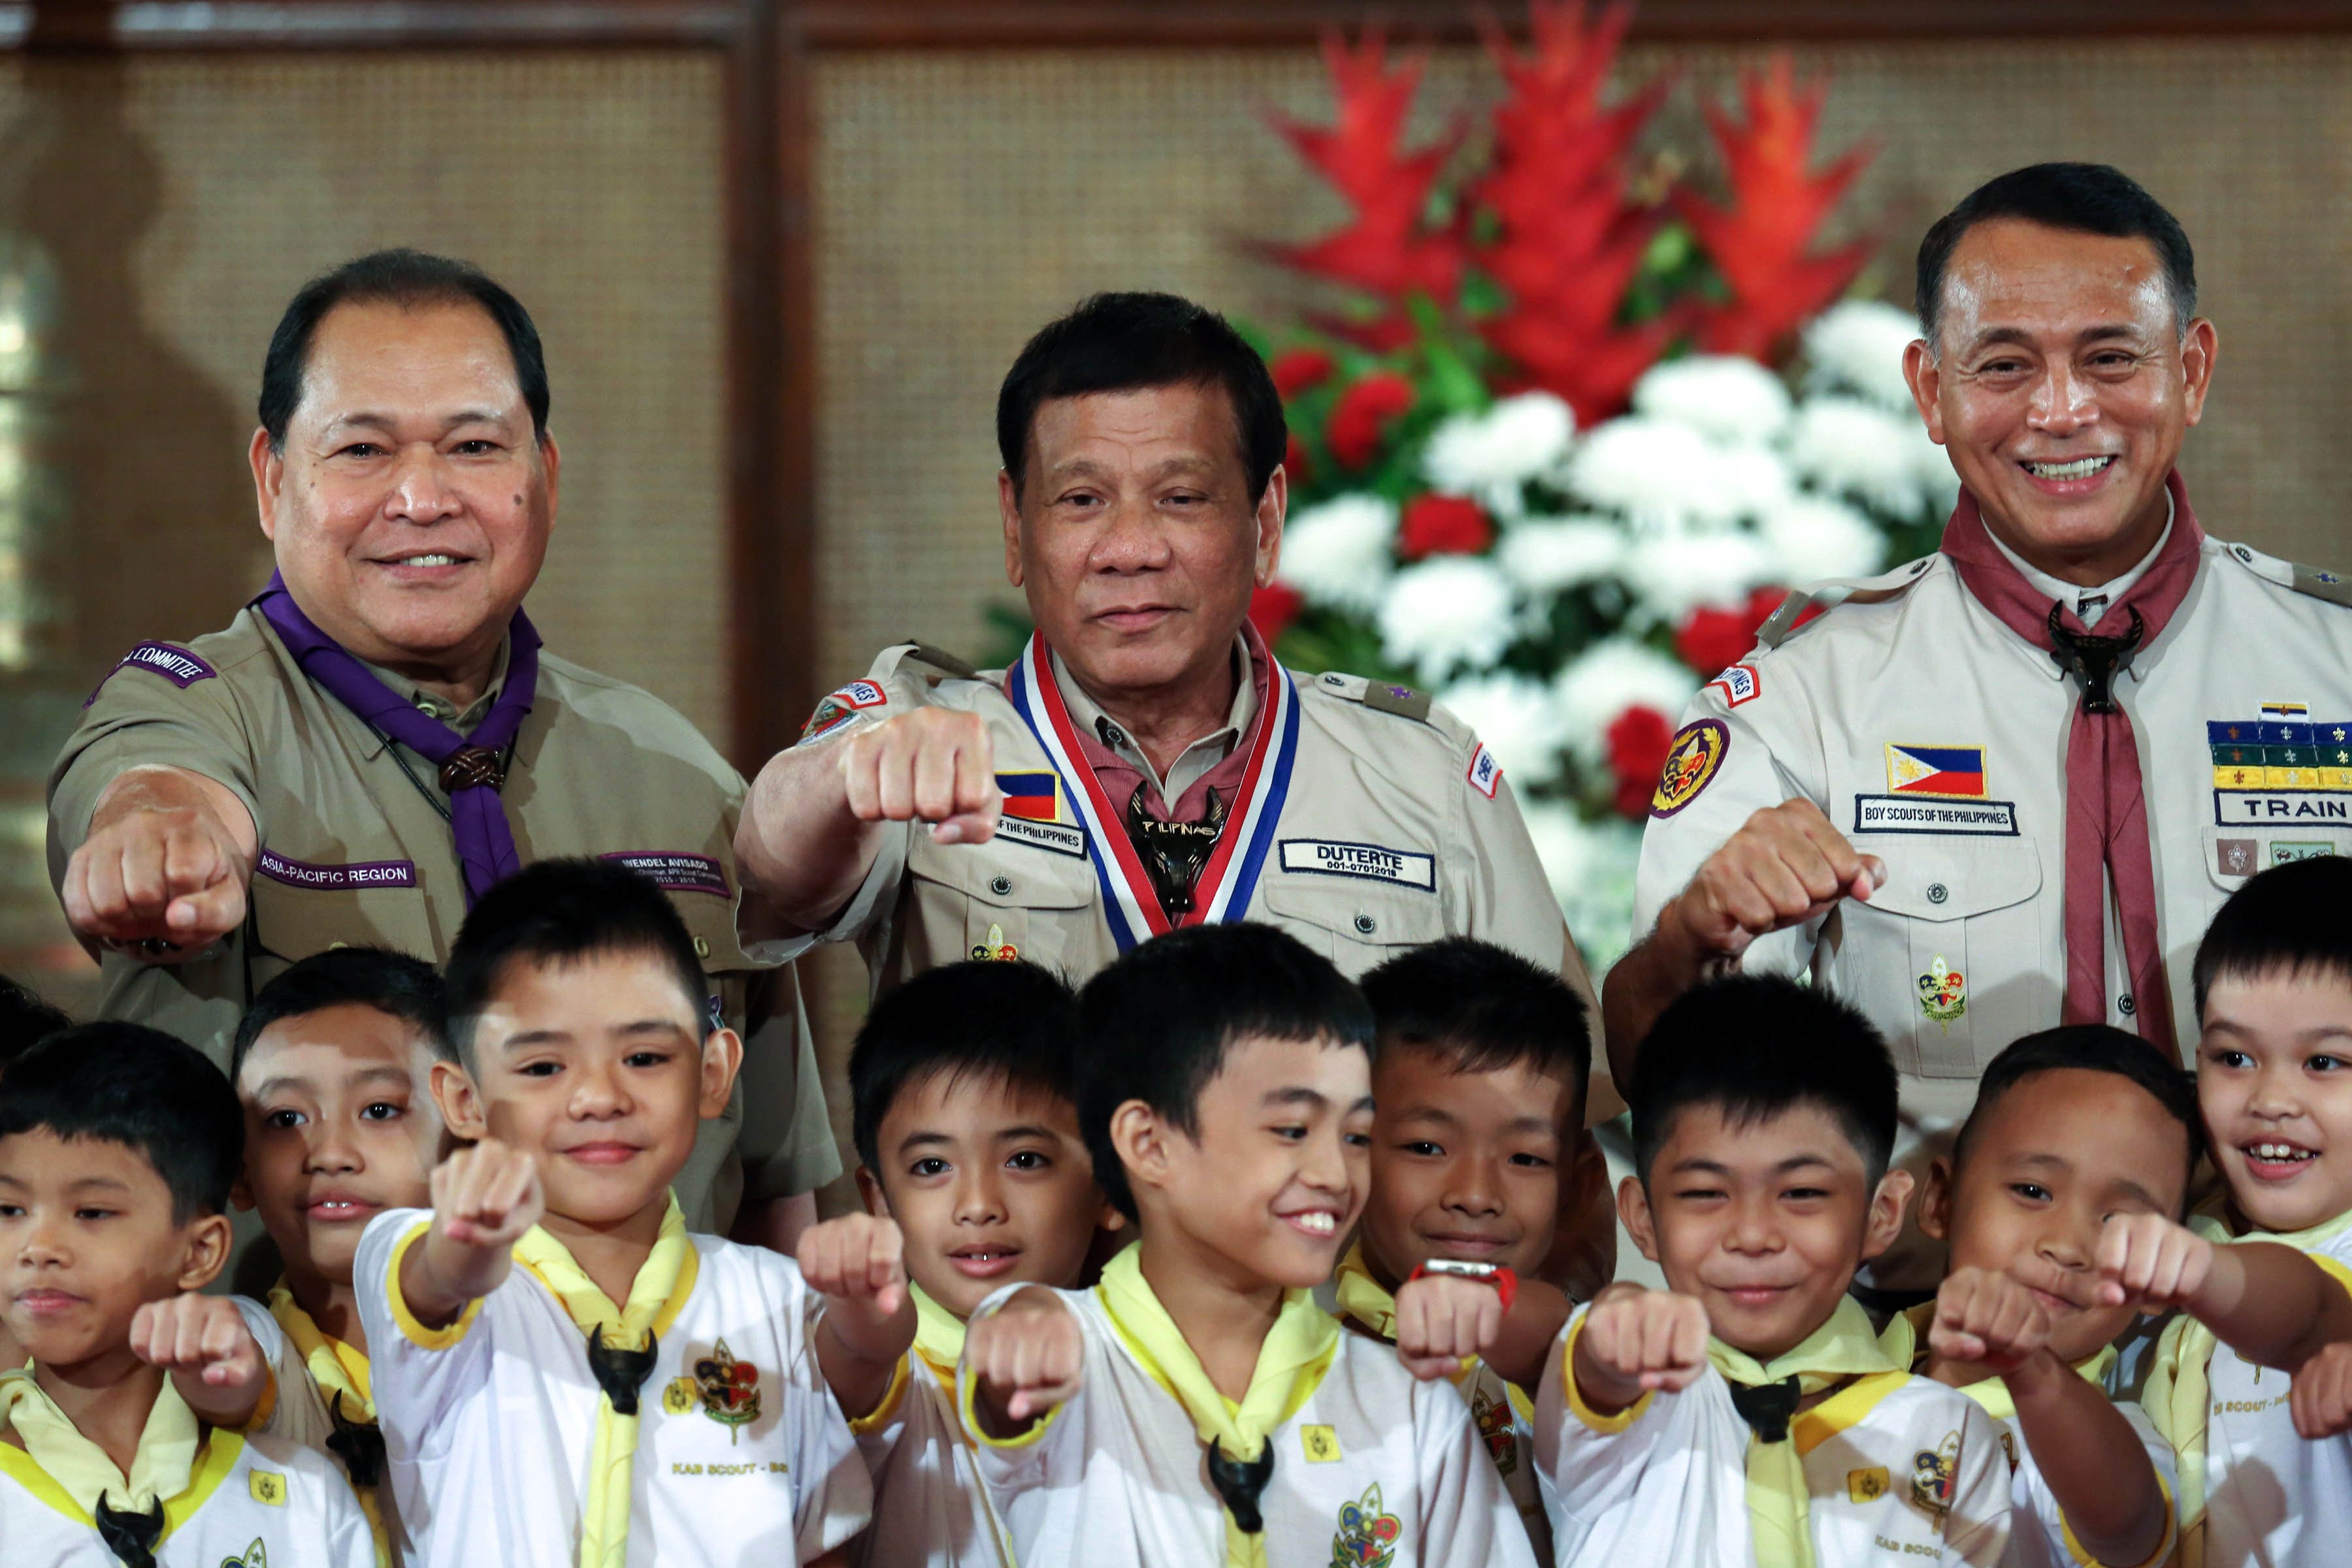 Pres. Duterte welcomes KAB Scouts to Malacañang